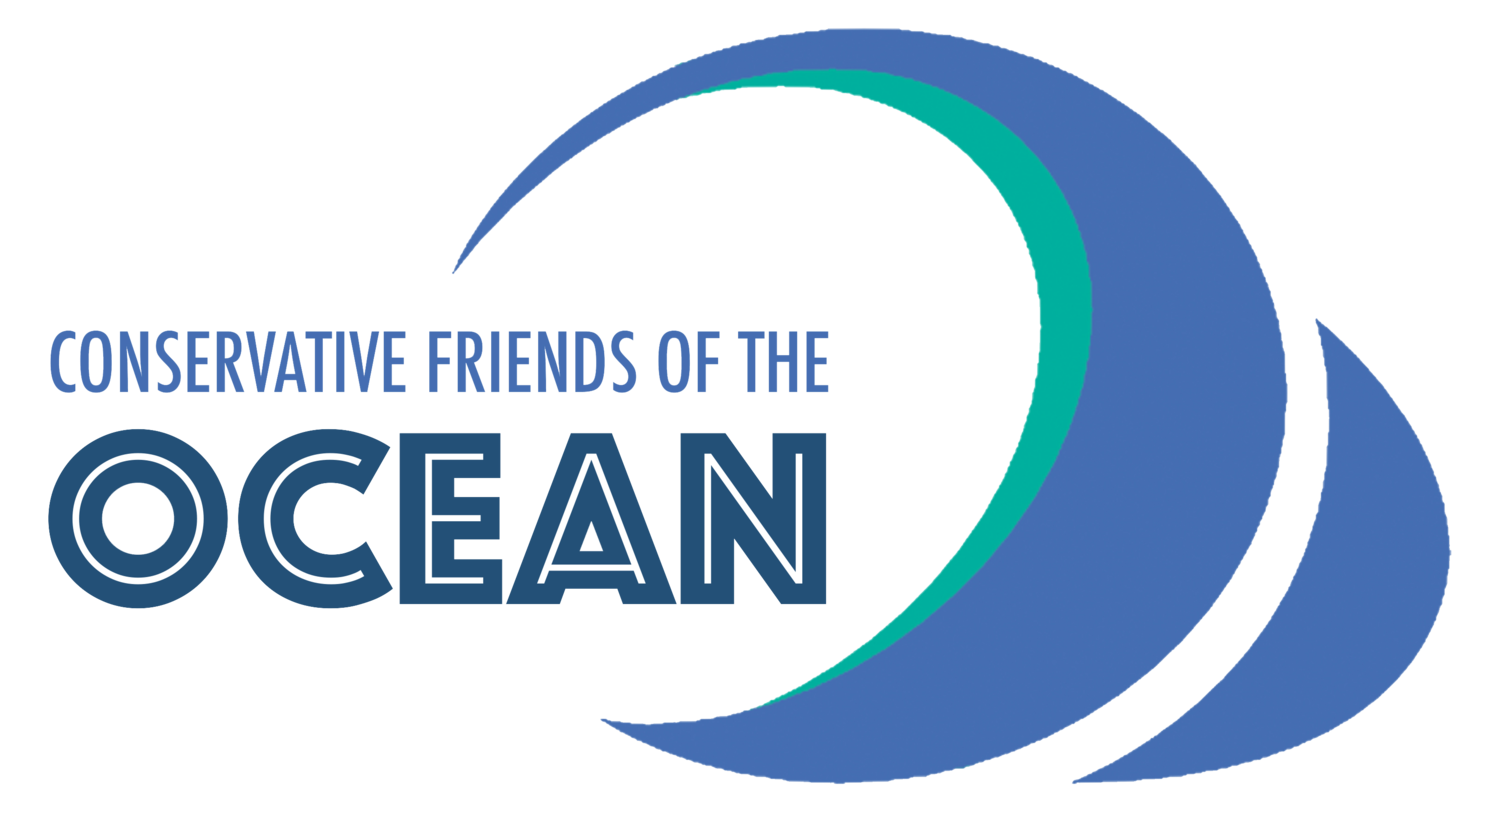 Conservative Friends of the Ocean